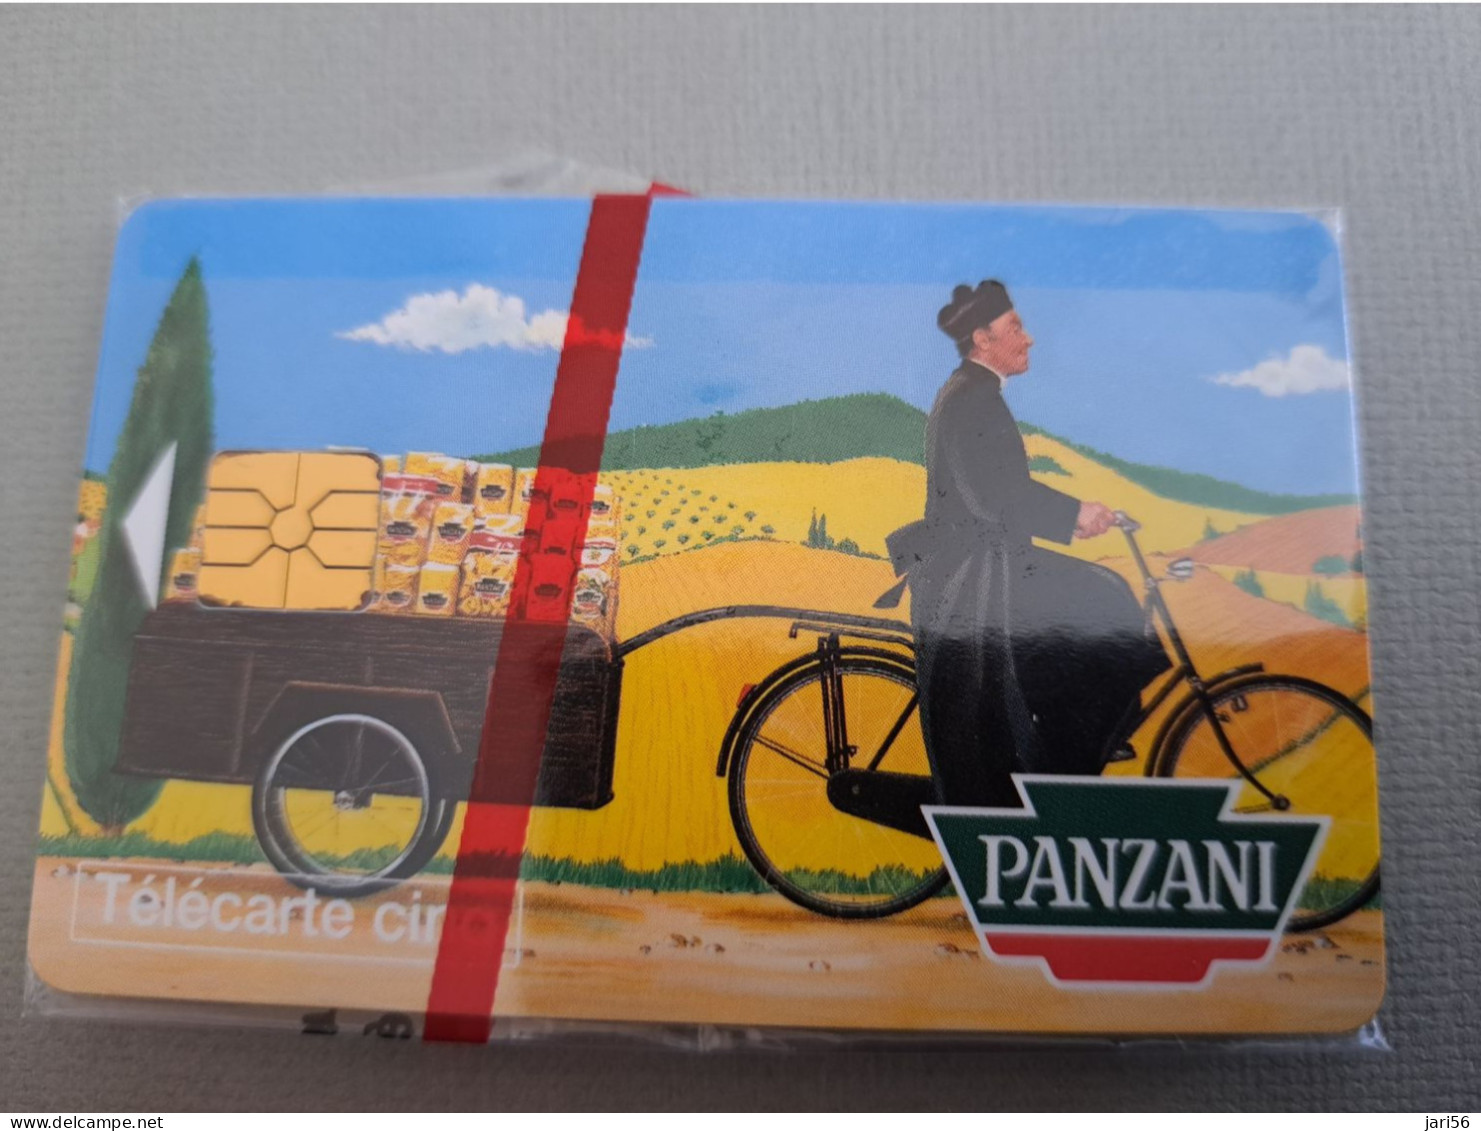 FRANCE/FRANKRIJK   CHIPCARD / PRIVE/ TELECARTE CINQ/ PANZANI/BYCICLE   MINT IN WRAPPER     WITH CHIP     ** 13633** - Voorafbetaalde Kaarten: Gsm